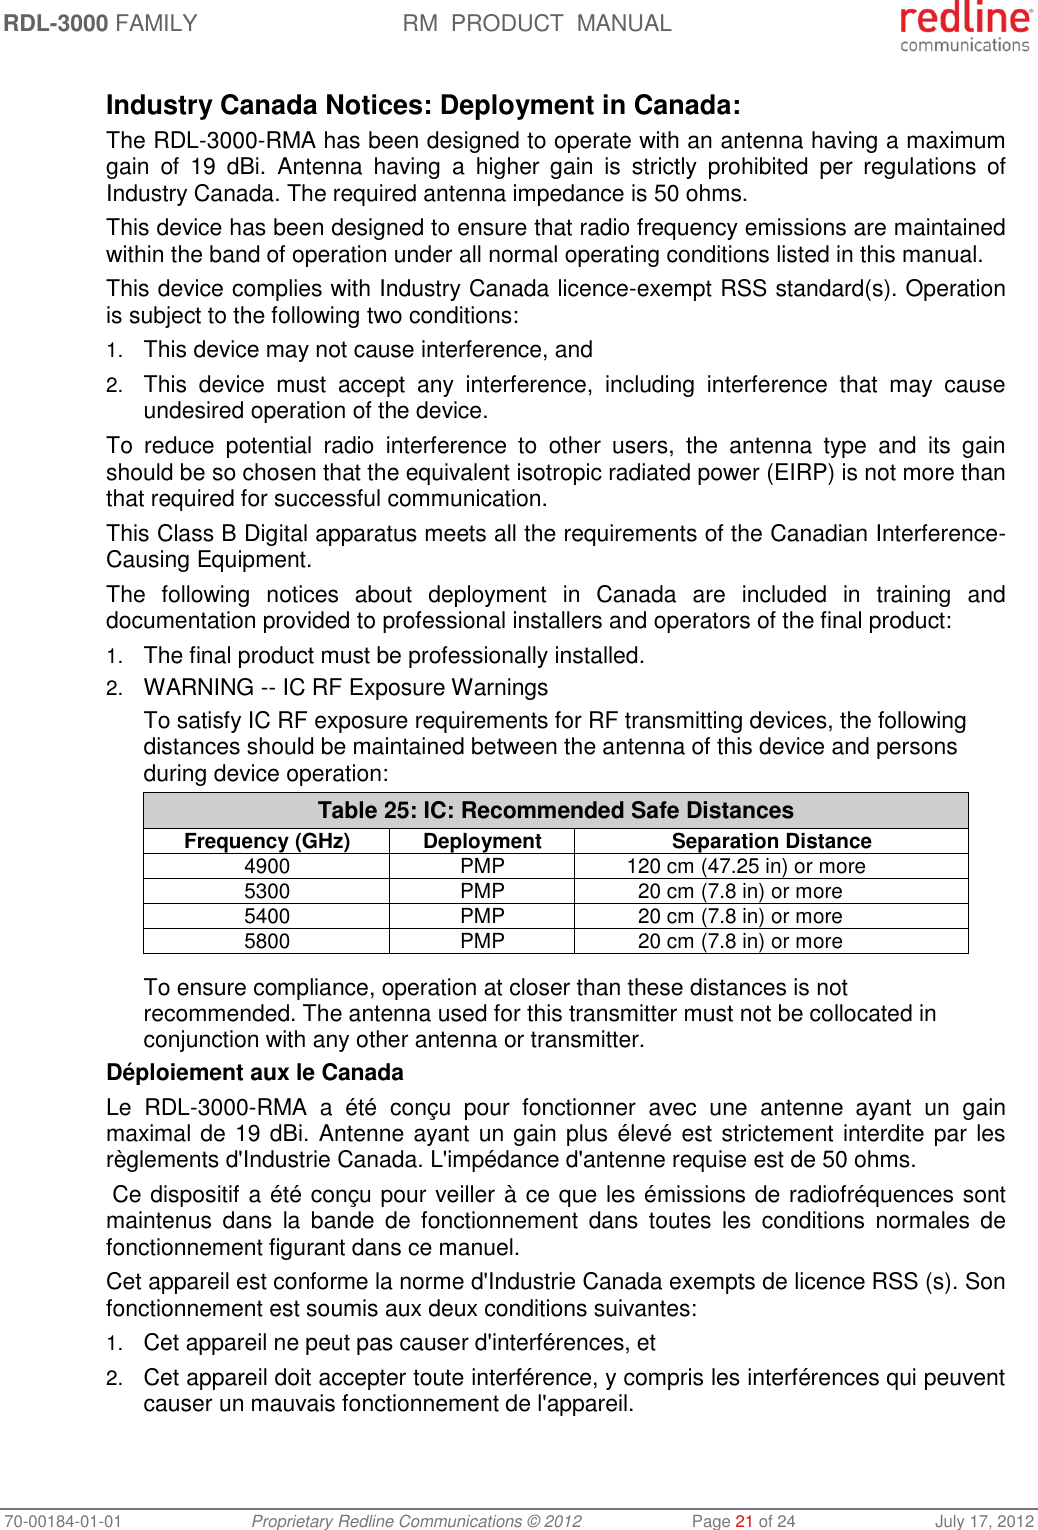 RDL-3000 FAMILY RM  PRODUCT  MANUAL 70-00184-01-01 Proprietary Redline Communications © 2012  Page 21 of 24  July 17, 2012  Industry Canada Notices: Deployment in Canada: The RDL-3000-RMA has been designed to operate with an antenna having a maximum gain  of  19  dBi.  Antenna  having  a  higher  gain  is  strictly  prohibited  per  regulations  of Industry Canada. The required antenna impedance is 50 ohms. This device has been designed to ensure that radio frequency emissions are maintained within the band of operation under all normal operating conditions listed in this manual. This device complies with Industry Canada licence-exempt RSS standard(s). Operation is subject to the following two conditions: 1. This device may not cause interference, and  2. This  device  must  accept  any  interference,  including  interference  that  may  cause undesired operation of the device. To  reduce  potential  radio  interference  to  other  users,  the  antenna  type  and  its  gain should be so chosen that the equivalent isotropic radiated power (EIRP) is not more than that required for successful communication. This Class B Digital apparatus meets all the requirements of the Canadian Interference-Causing Equipment. The  following  notices  about  deployment  in  Canada  are  included  in  training  and documentation provided to professional installers and operators of the final product: 1. The final product must be professionally installed. 2. WARNING -- IC RF Exposure Warnings To satisfy IC RF exposure requirements for RF transmitting devices, the following distances should be maintained between the antenna of this device and persons during device operation: Table 25: IC: Recommended Safe Distances Frequency (GHz) Deployment Separation Distance 4900 PMP 120 cm (47.25 in) or more 5300 PMP 20 cm (7.8 in) or more 5400 PMP 20 cm (7.8 in) or more 5800 PMP 20 cm (7.8 in) or more   To ensure compliance, operation at closer than these distances is not recommended. The antenna used for this transmitter must not be collocated in conjunction with any other antenna or transmitter. Déploiement aux le Canada Le  RDL-3000-RMA  a  été  conçu  pour  fonctionner  avec  une  antenne  ayant  un  gain maximal de 19 dBi. Antenne ayant un gain plus élevé est strictement interdite par les règlements d&apos;Industrie Canada. L&apos;impédance d&apos;antenne requise est de 50 ohms.  Ce dispositif a été conçu pour veiller à ce que les émissions de radiofréquences sont maintenus  dans  la  bande  de  fonctionnement  dans  toutes  les  conditions  normales  de fonctionnement figurant dans ce manuel. Cet appareil est conforme la norme d&apos;Industrie Canada exempts de licence RSS (s). Son fonctionnement est soumis aux deux conditions suivantes: 1. Cet appareil ne peut pas causer d&apos;interférences, et 2. Cet appareil doit accepter toute interférence, y compris les interférences qui peuvent causer un mauvais fonctionnement de l&apos;appareil. 